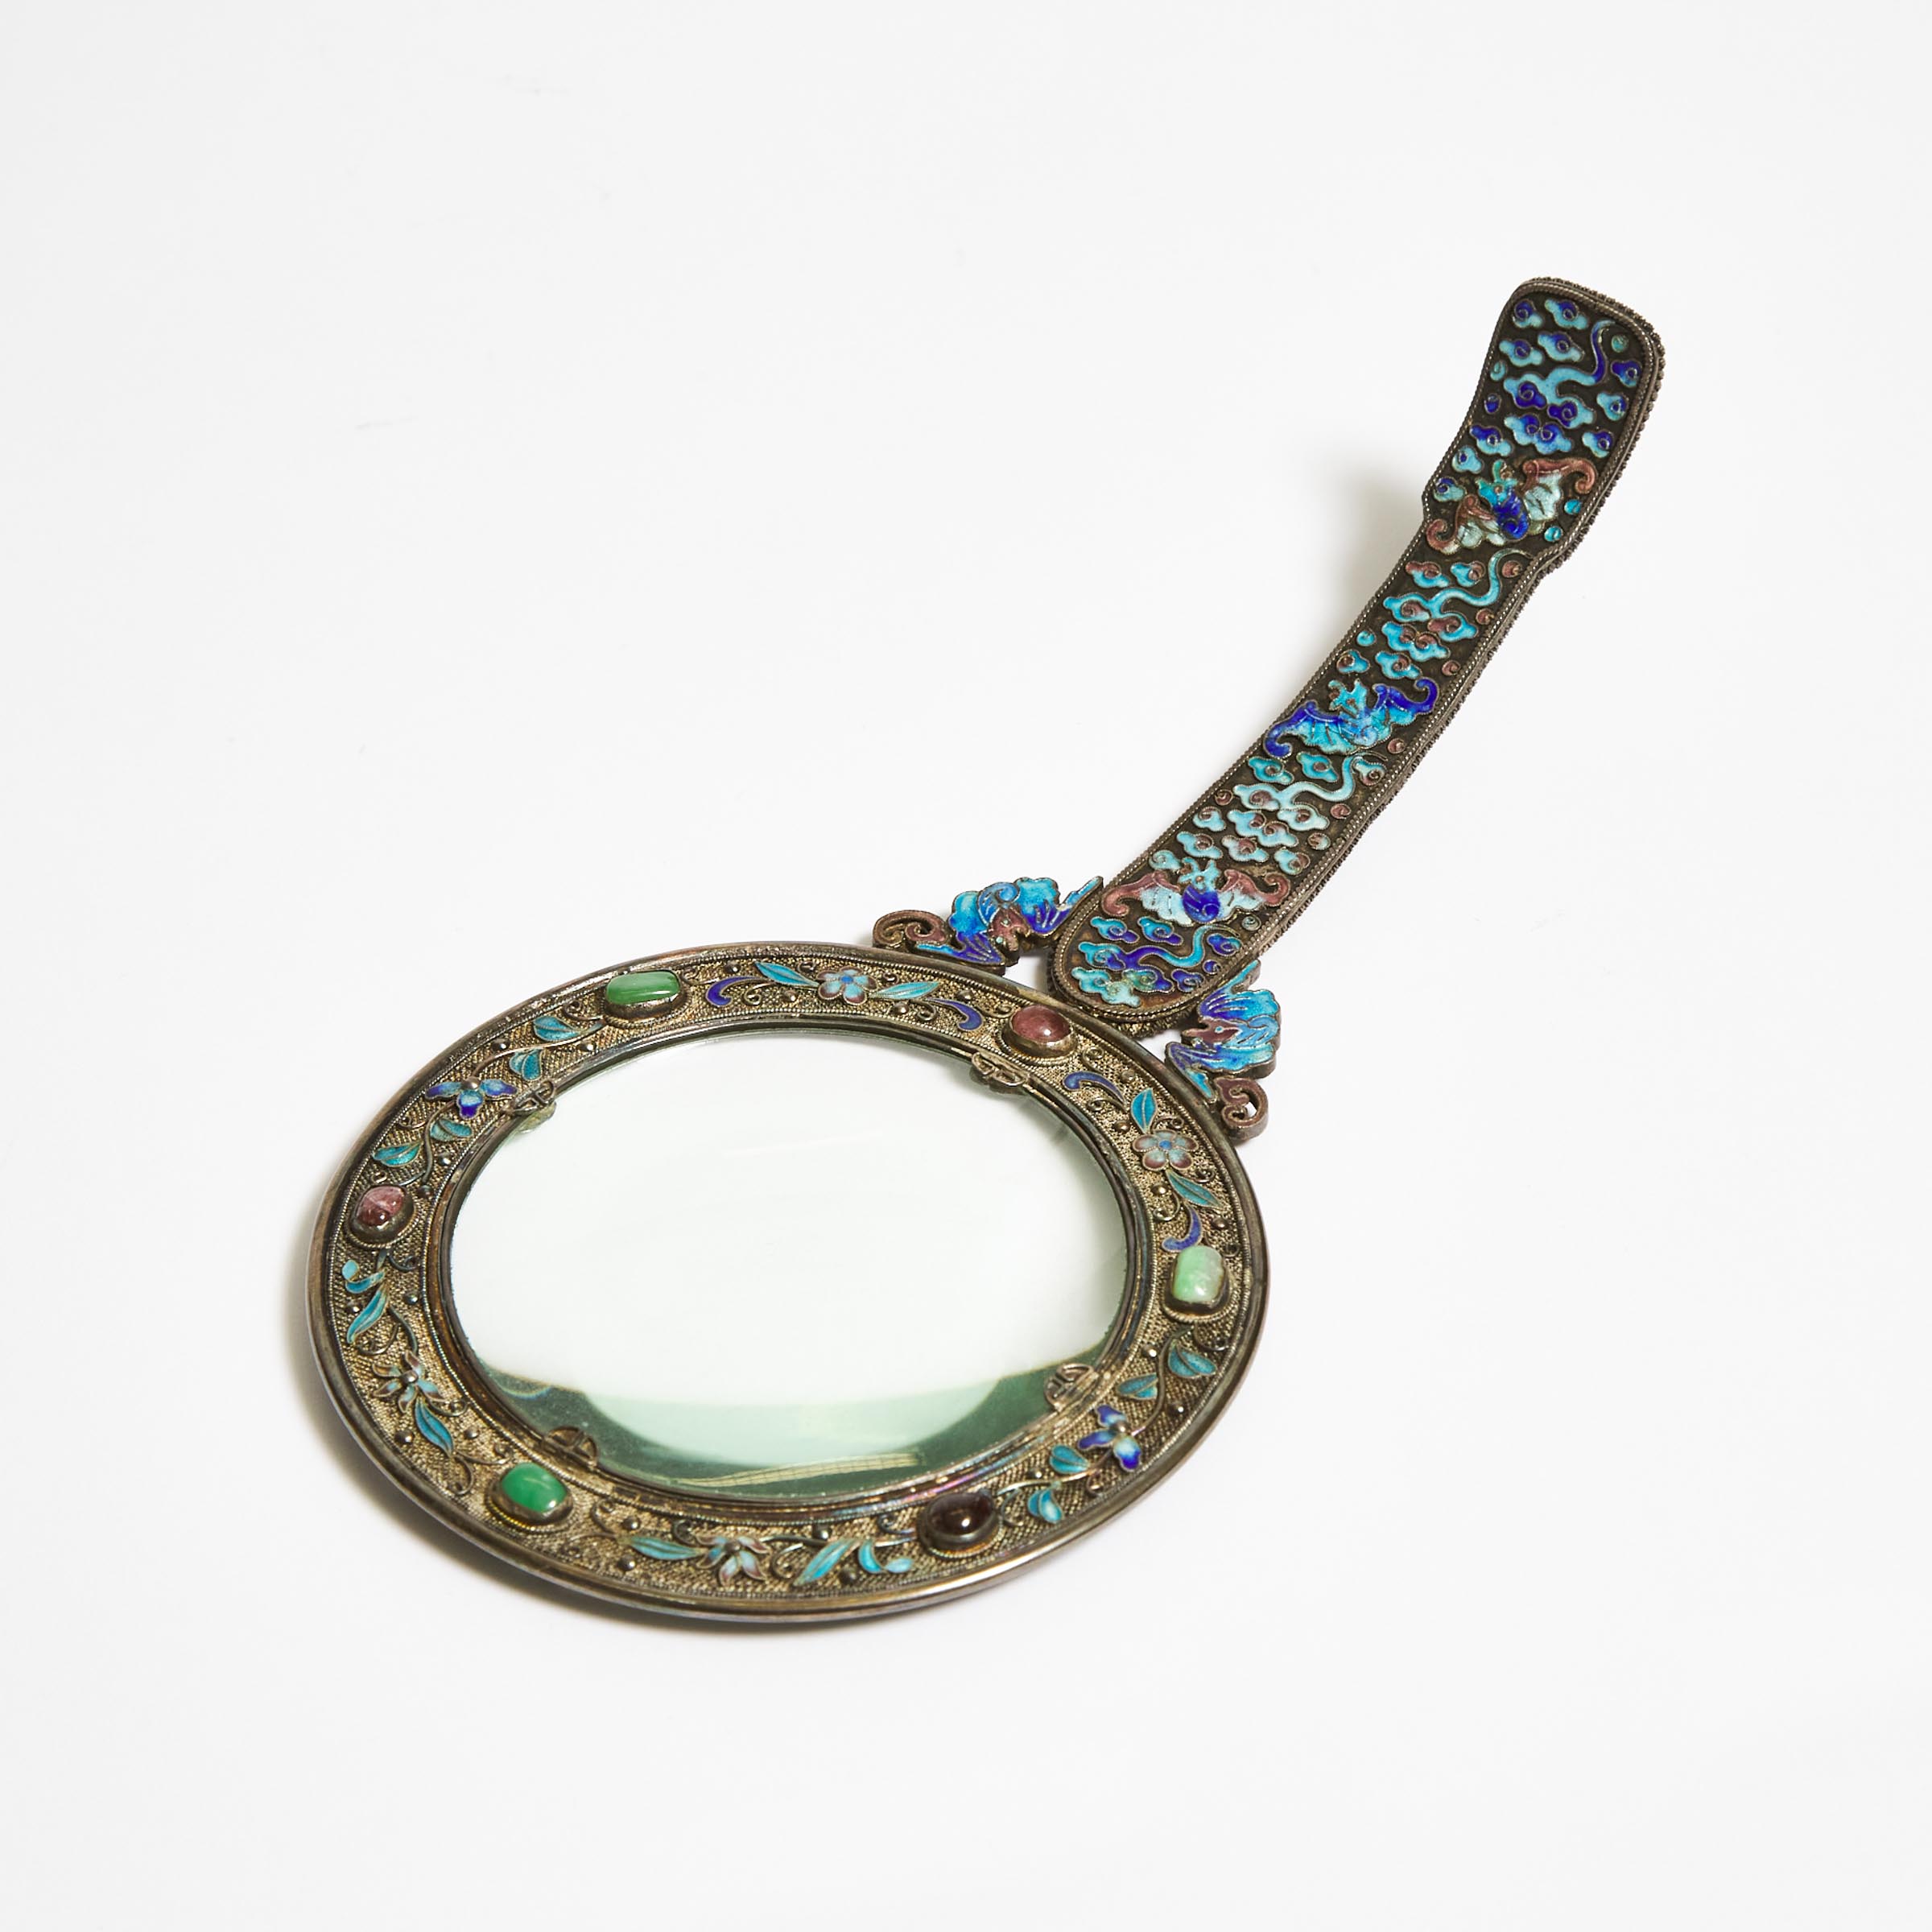 A Jade-Mounted Filigree Enamel Magnifying Glass, 19th/20th Century